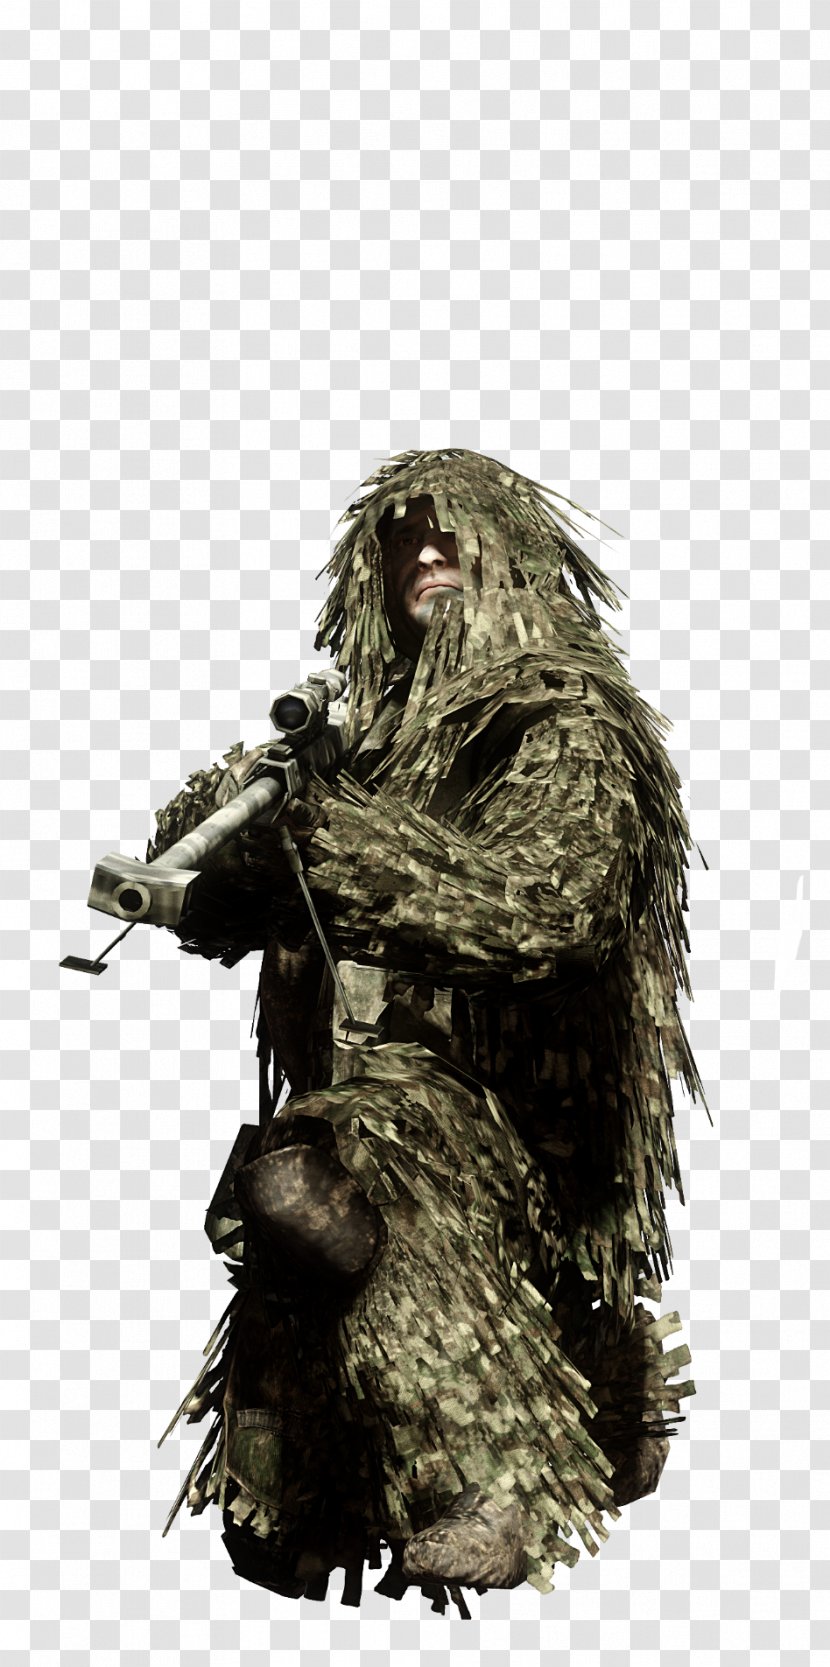 Battlefield: Bad Company 2 Battlefield 3 Ghillie Suits Camouflage - Sniper Transparent PNG